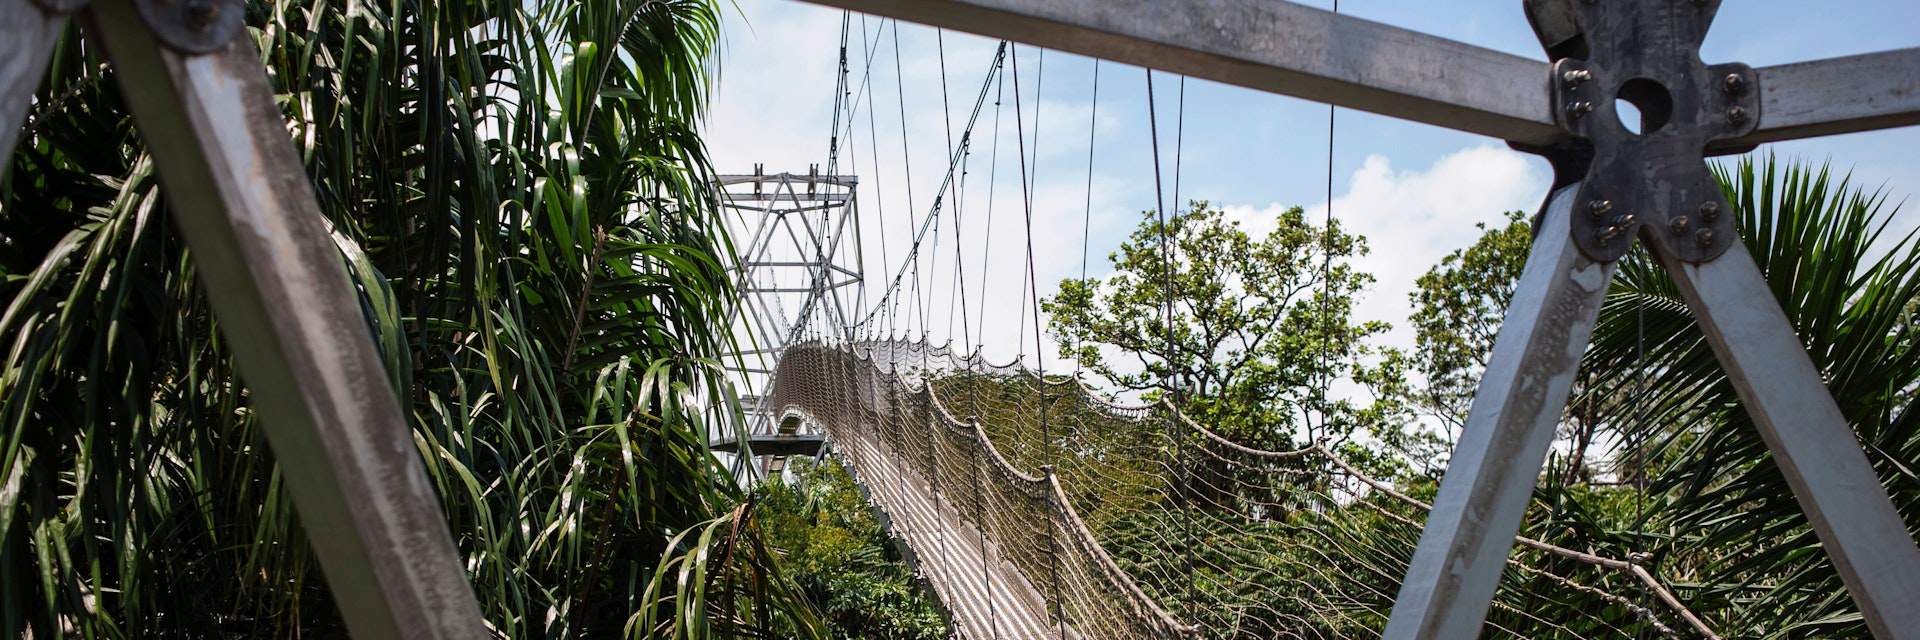 This picture taken on on September 8, 2016 shows the Canopy Walkway bridge, the longest canopy walk in Africa, in the Lekki Conservation Centre in Lagos..Traffic jams may clog the city and the beaches look like garbage dumps, but for the Lagos state government developing tourism is now a do or die matter. / AFP / STEFAN HEUNIS        (Photo credit should read STEFAN HEUNIS/AFP/Getty Images)